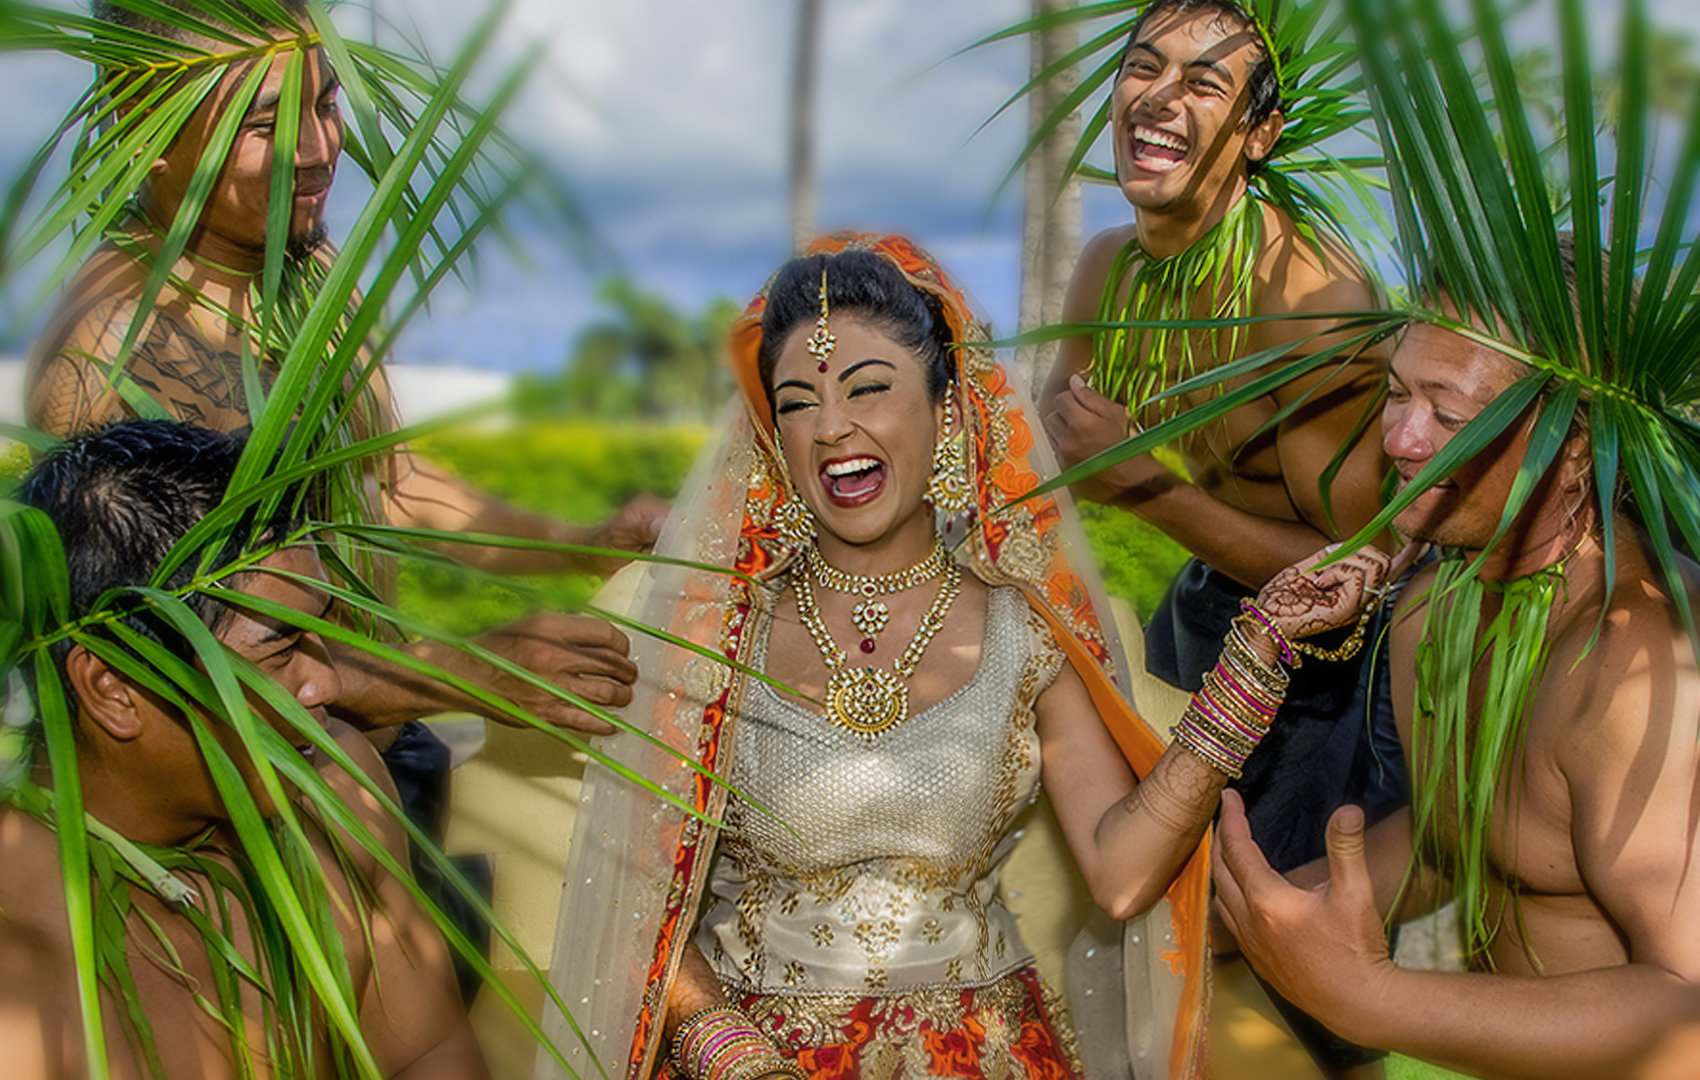 Indo9an bride on Maui has fun with her local helpers.